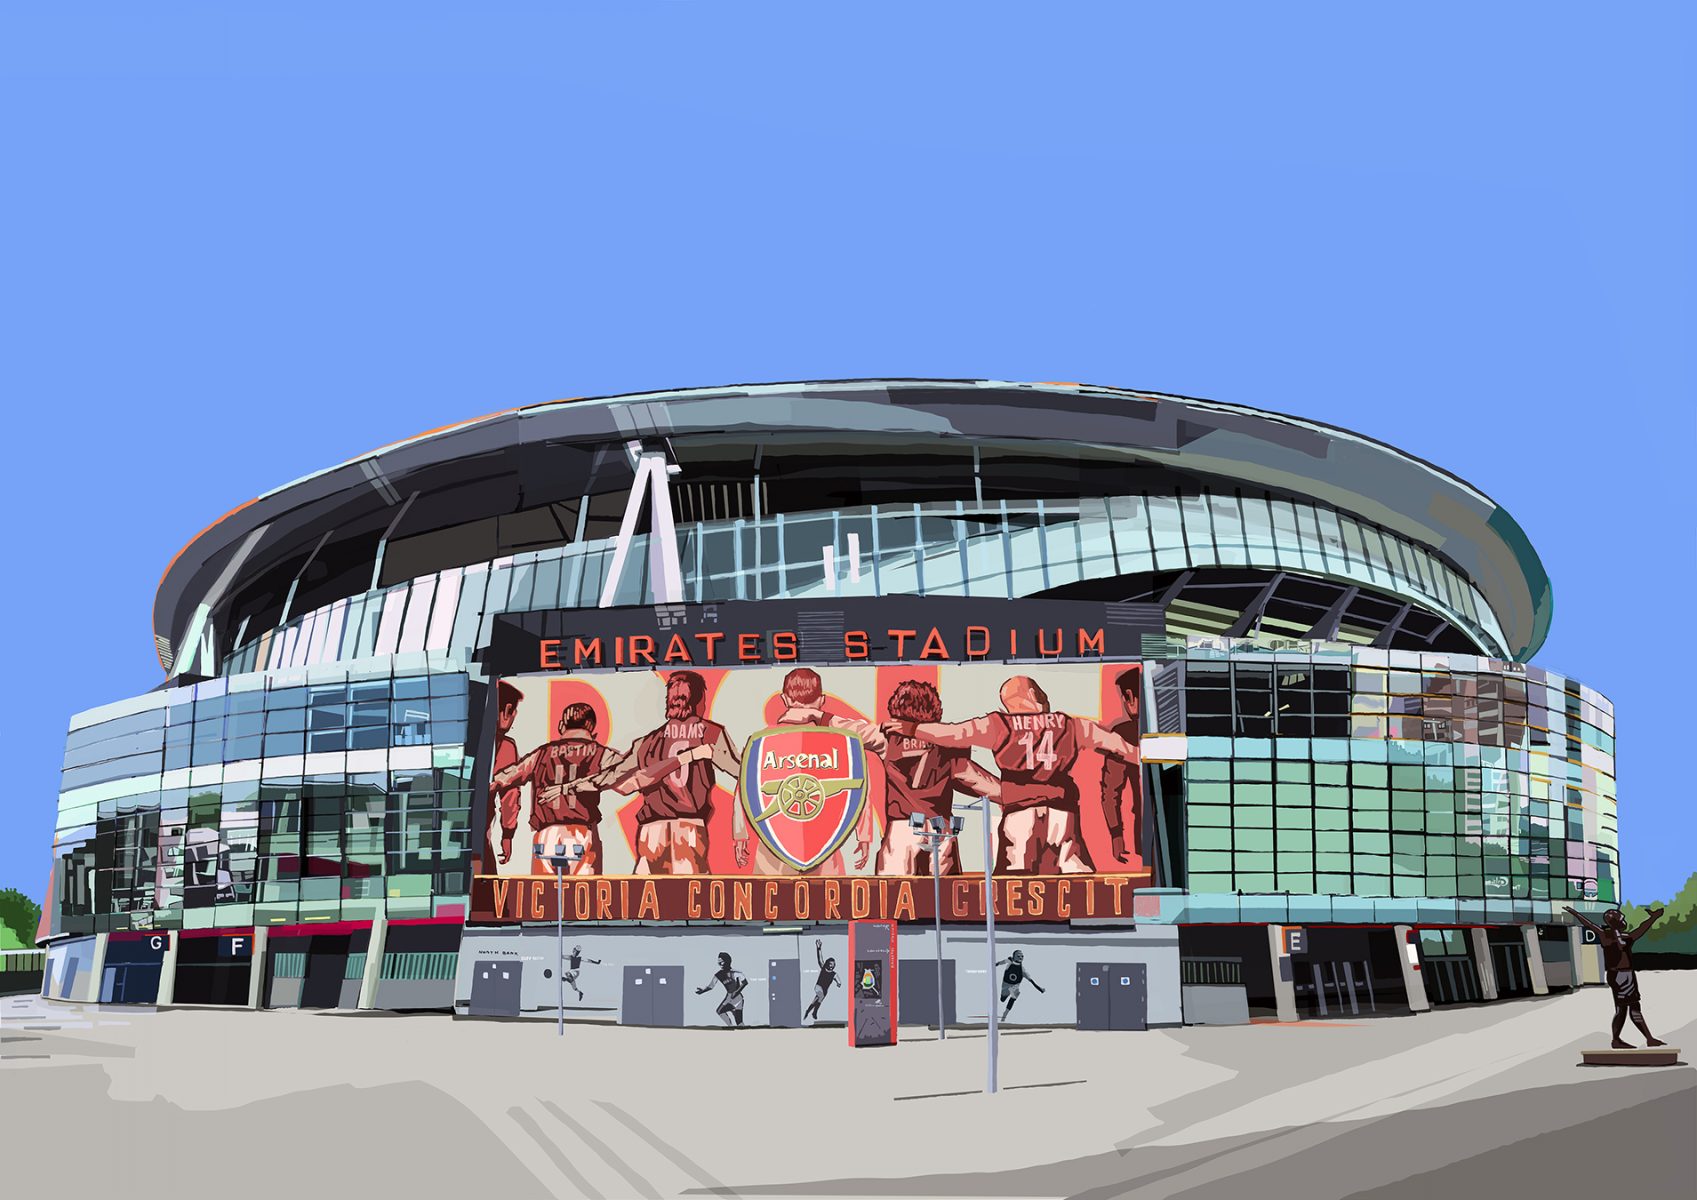 Buy Emirates Stadium Arsenal Football Club F C North London Art Print Urban Makers By Tomartacus Urban Makers Next Day Delivery Available